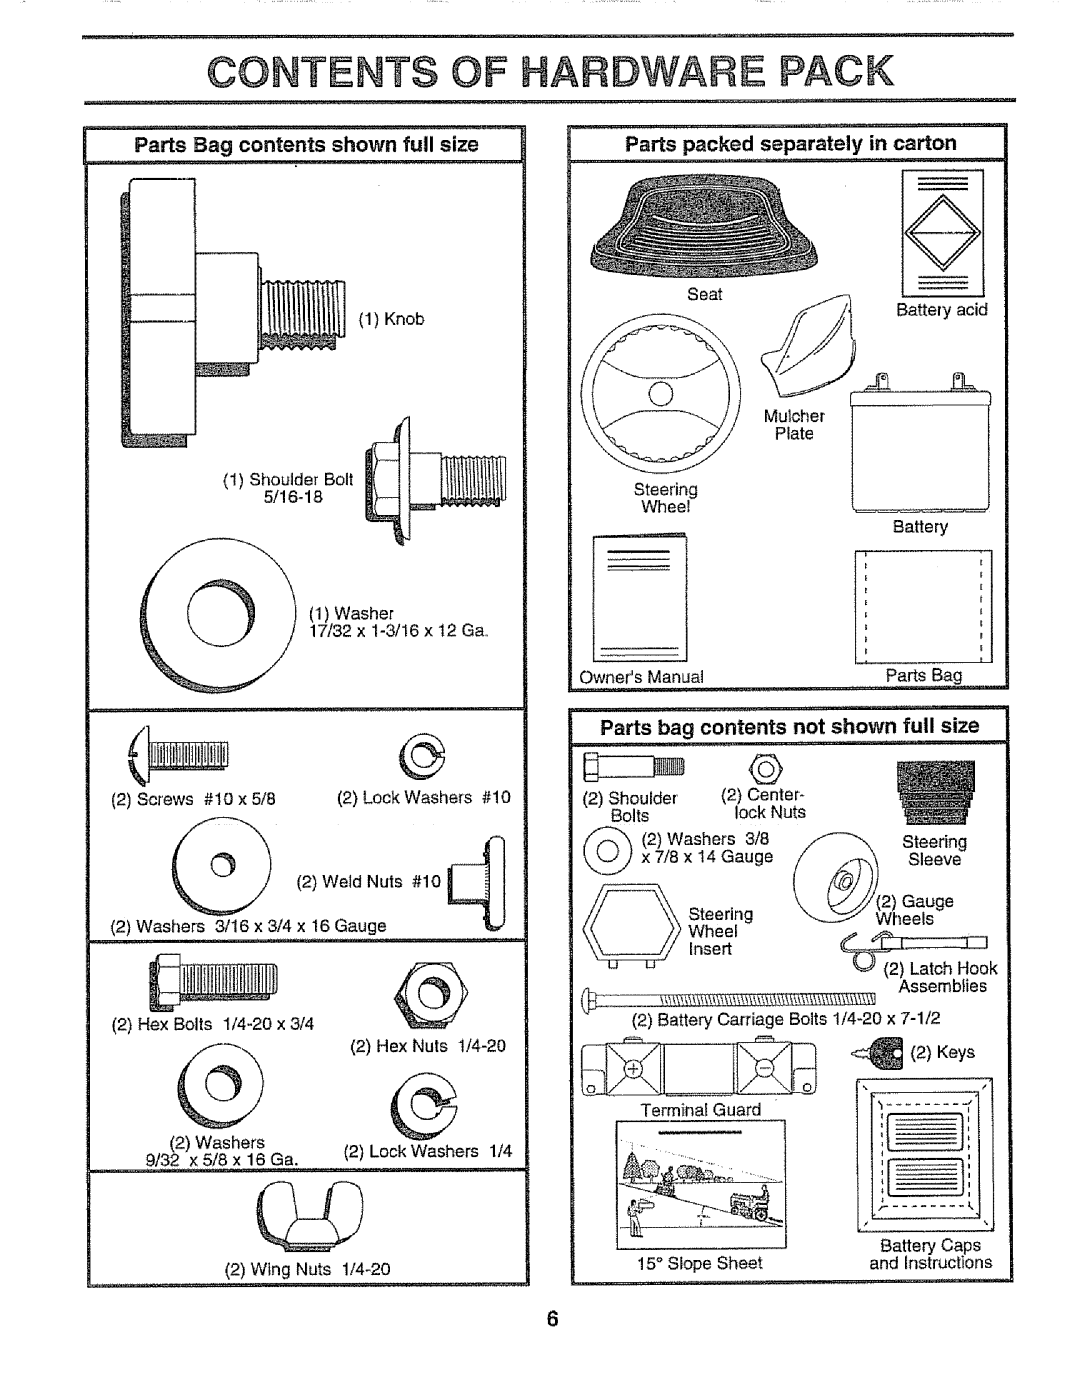 Sears 917.257651 Contents Of Hardware, Parts Bag contents shown full size, Parts bag contents not shown full size, Pack 